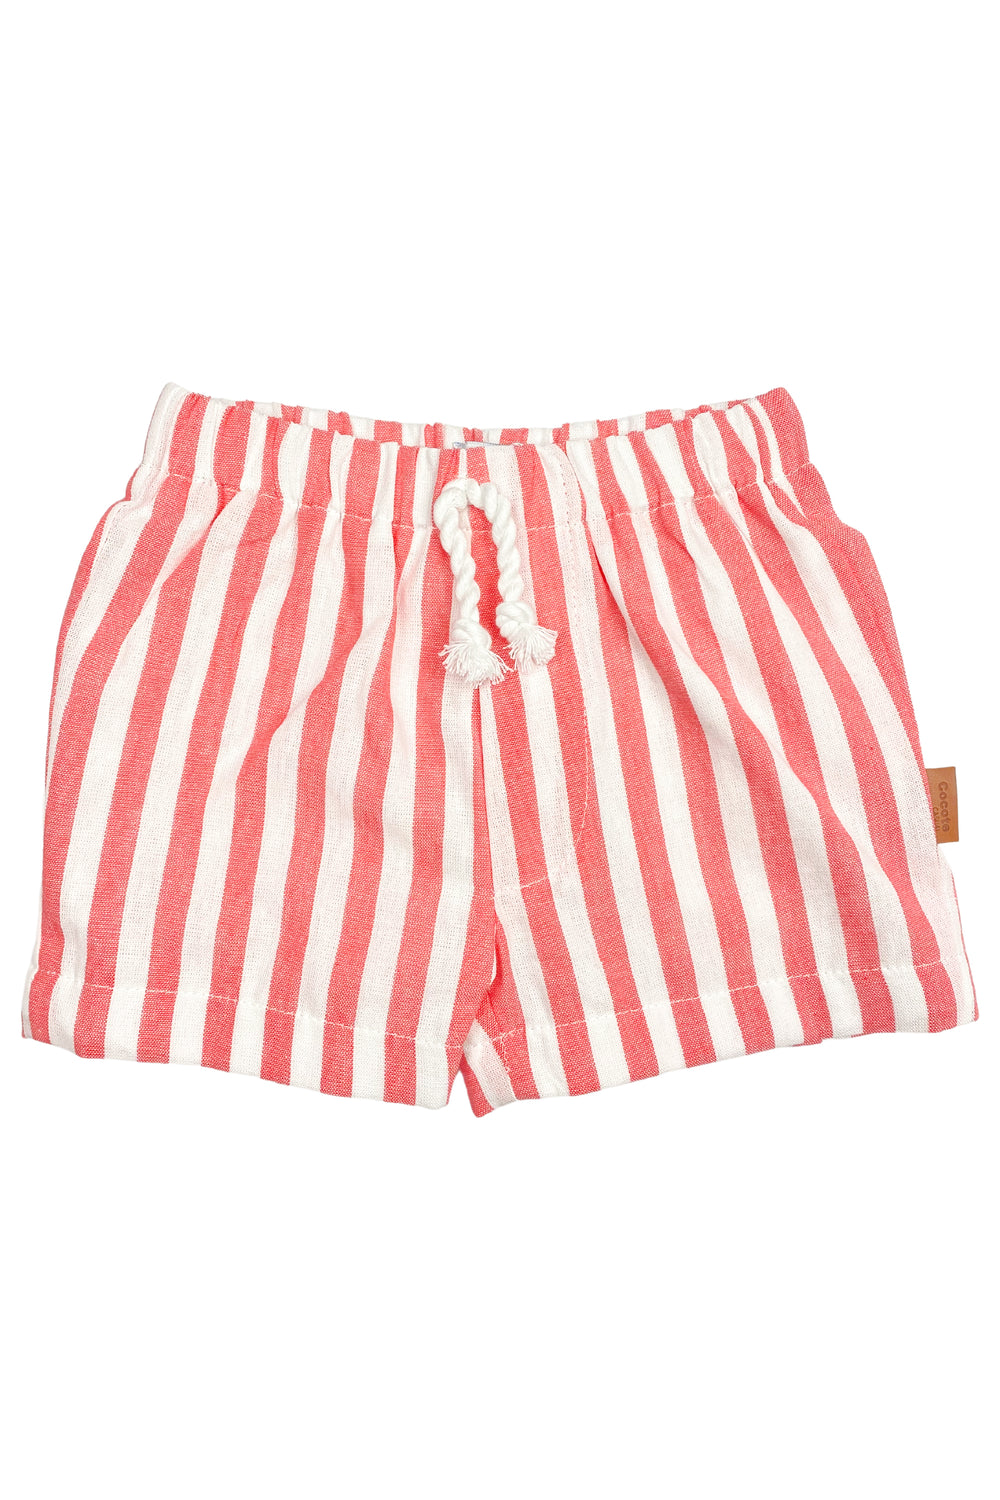 Cocote "Lawrence" Striped Shorts | Millie and John